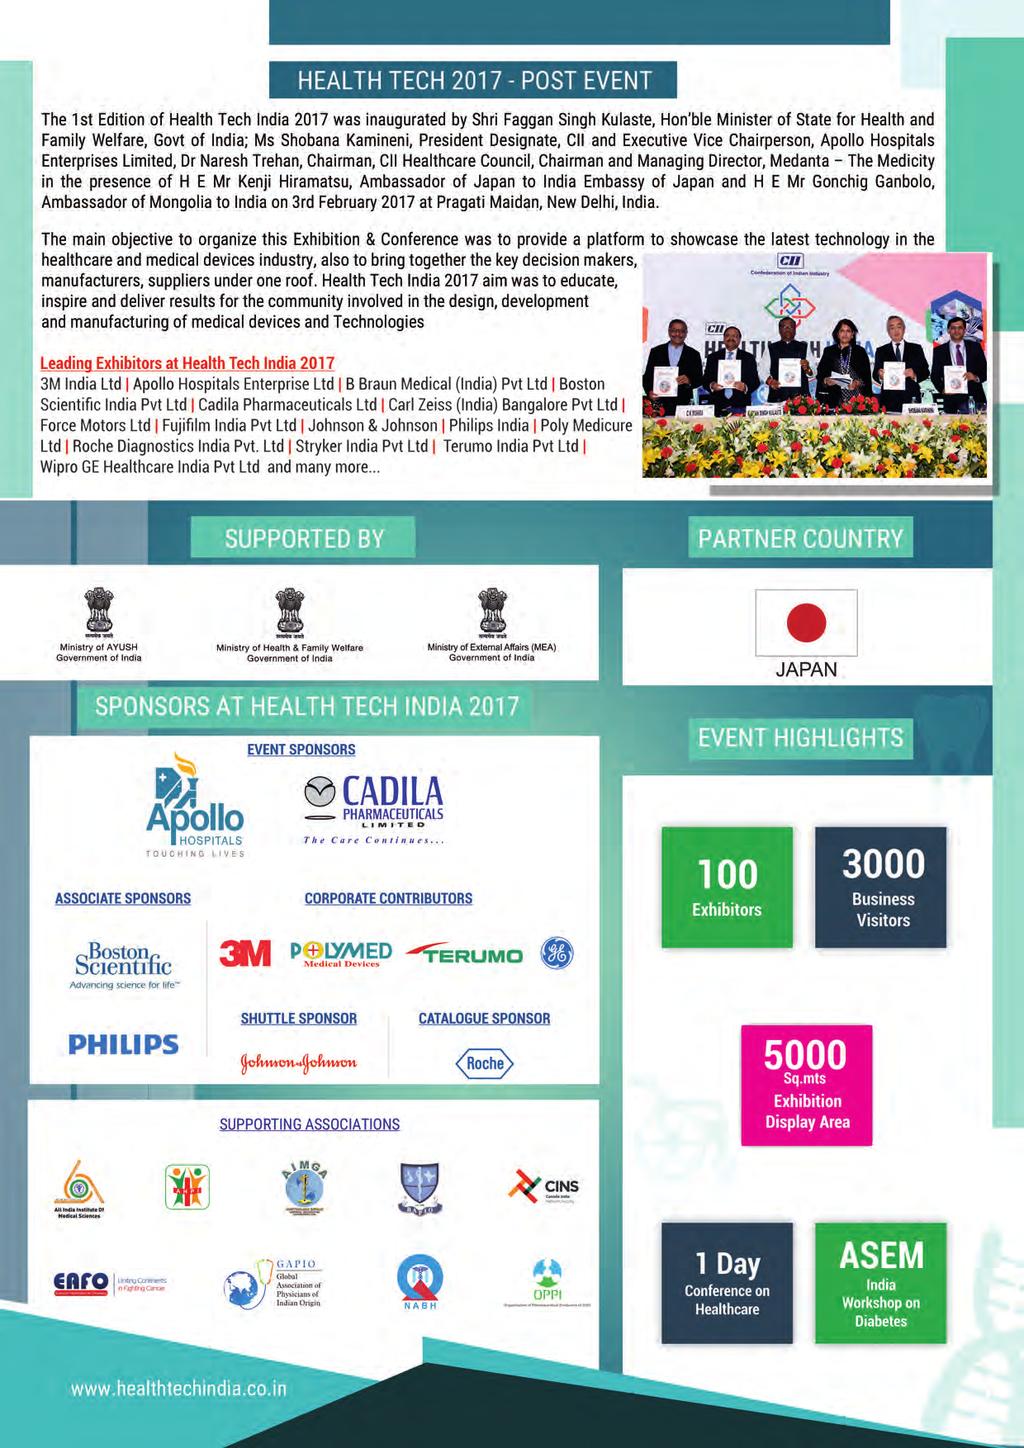 HEALTH TECH 2017 - POST EVENT The 1st Edition of Health Tech India 2017 was inaugurated by Shri Faggan Singh Kulaste, Hon'ble Minister of State for Health and Family Welfare, Govt of India; Ms